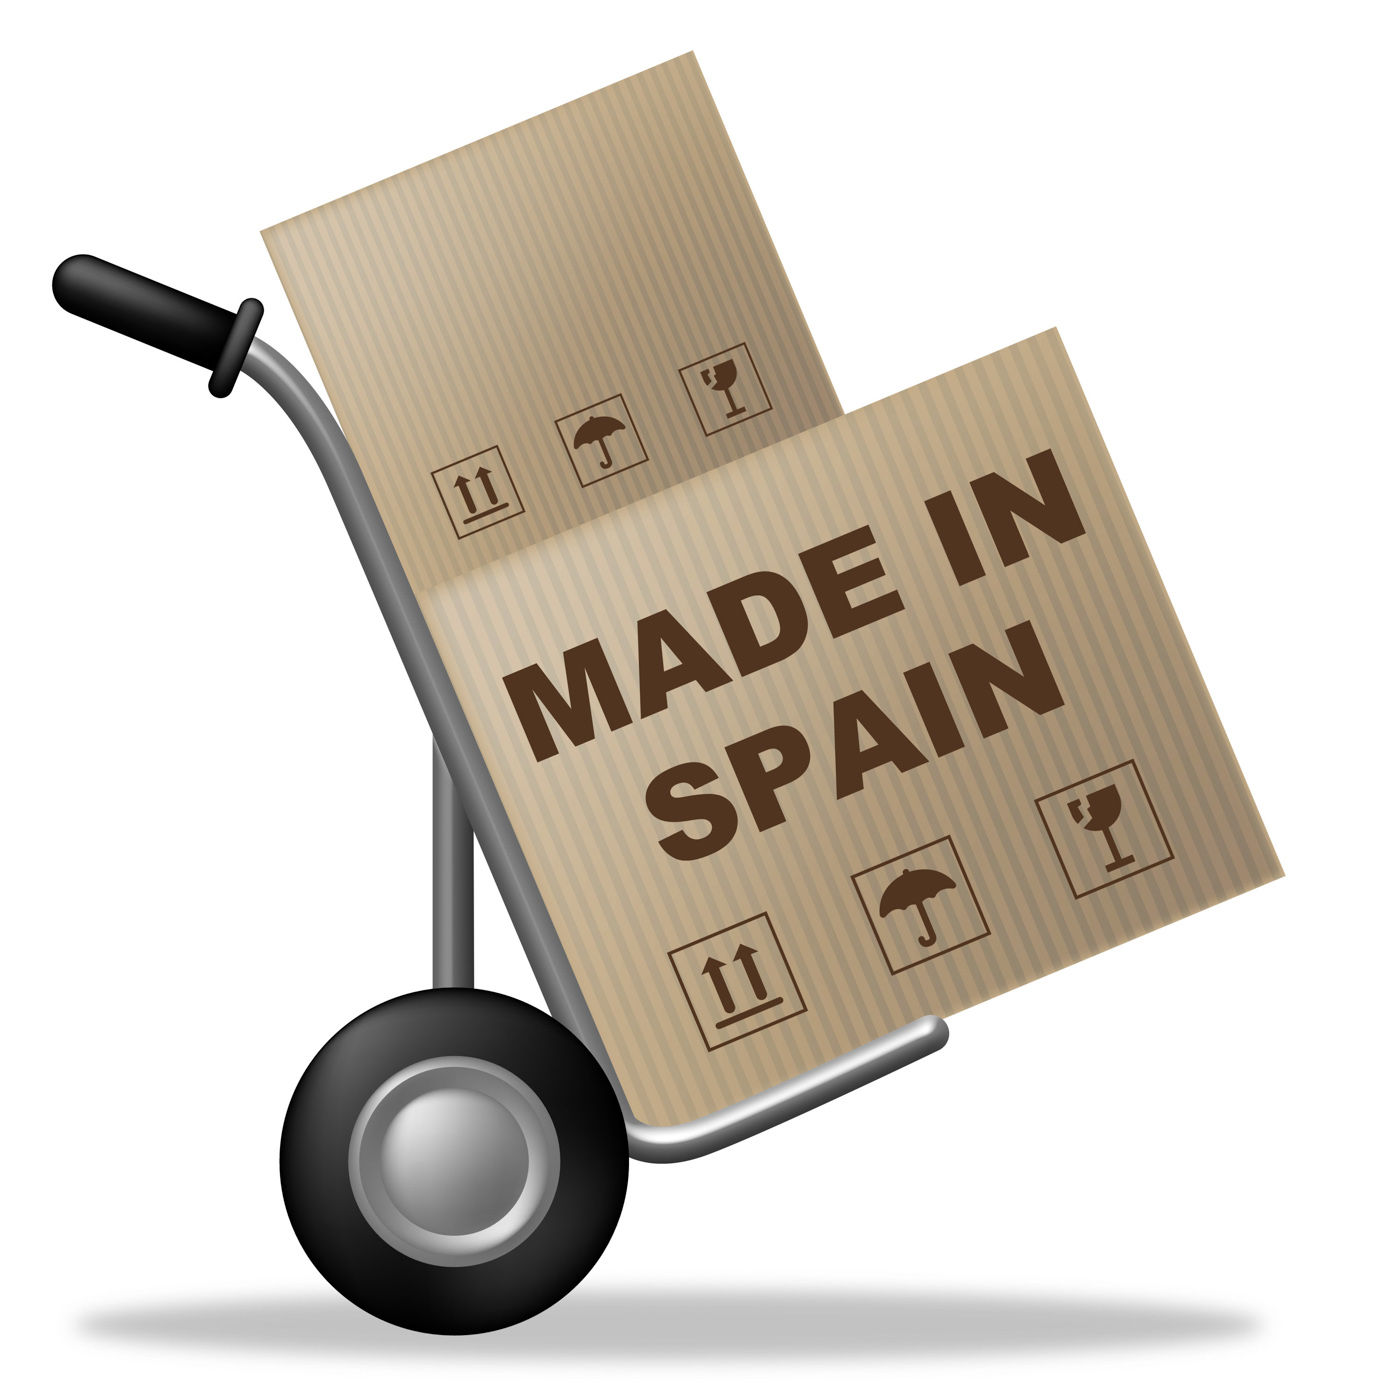 Made in spain shows shipping box and cardboard photo